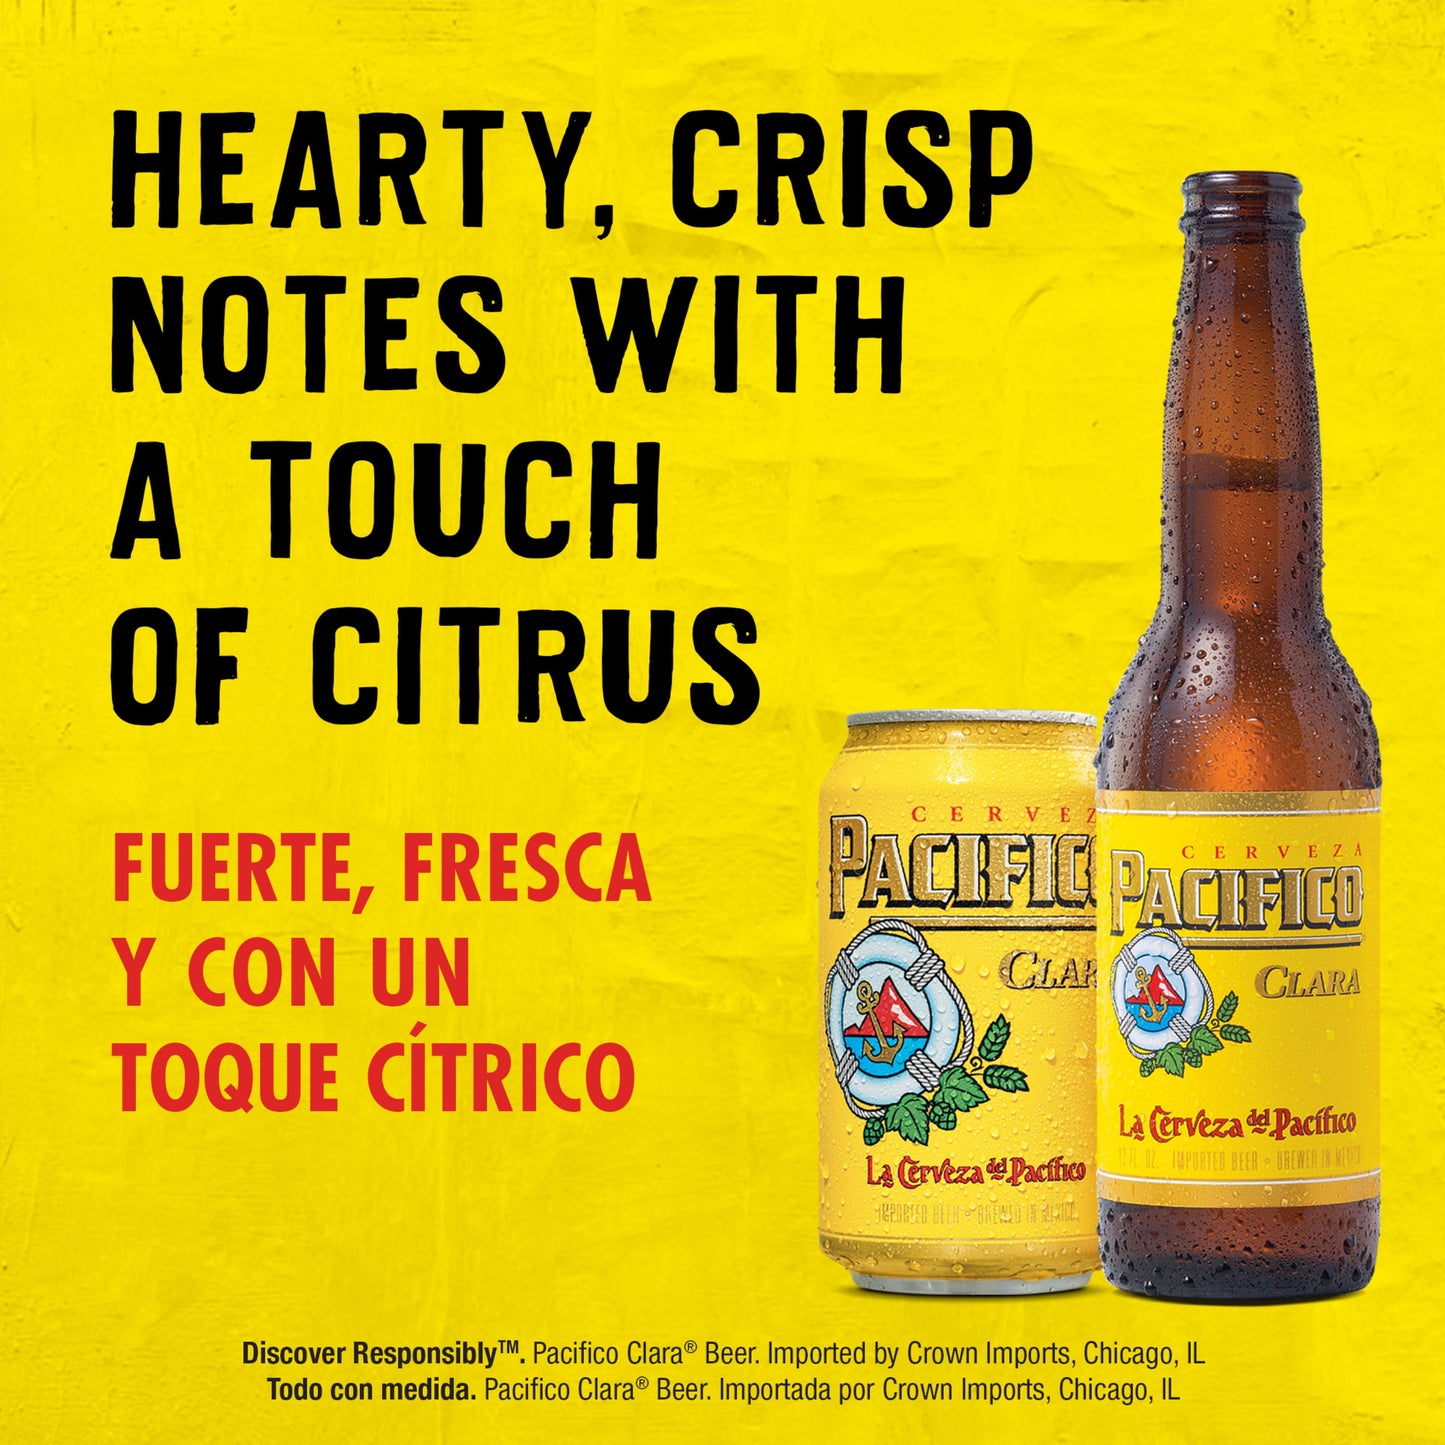 Pacifico Clara Mexican Lager Import Beer, 12 Pack Beer, 12 fl oz Bottles, 4.4% ABV